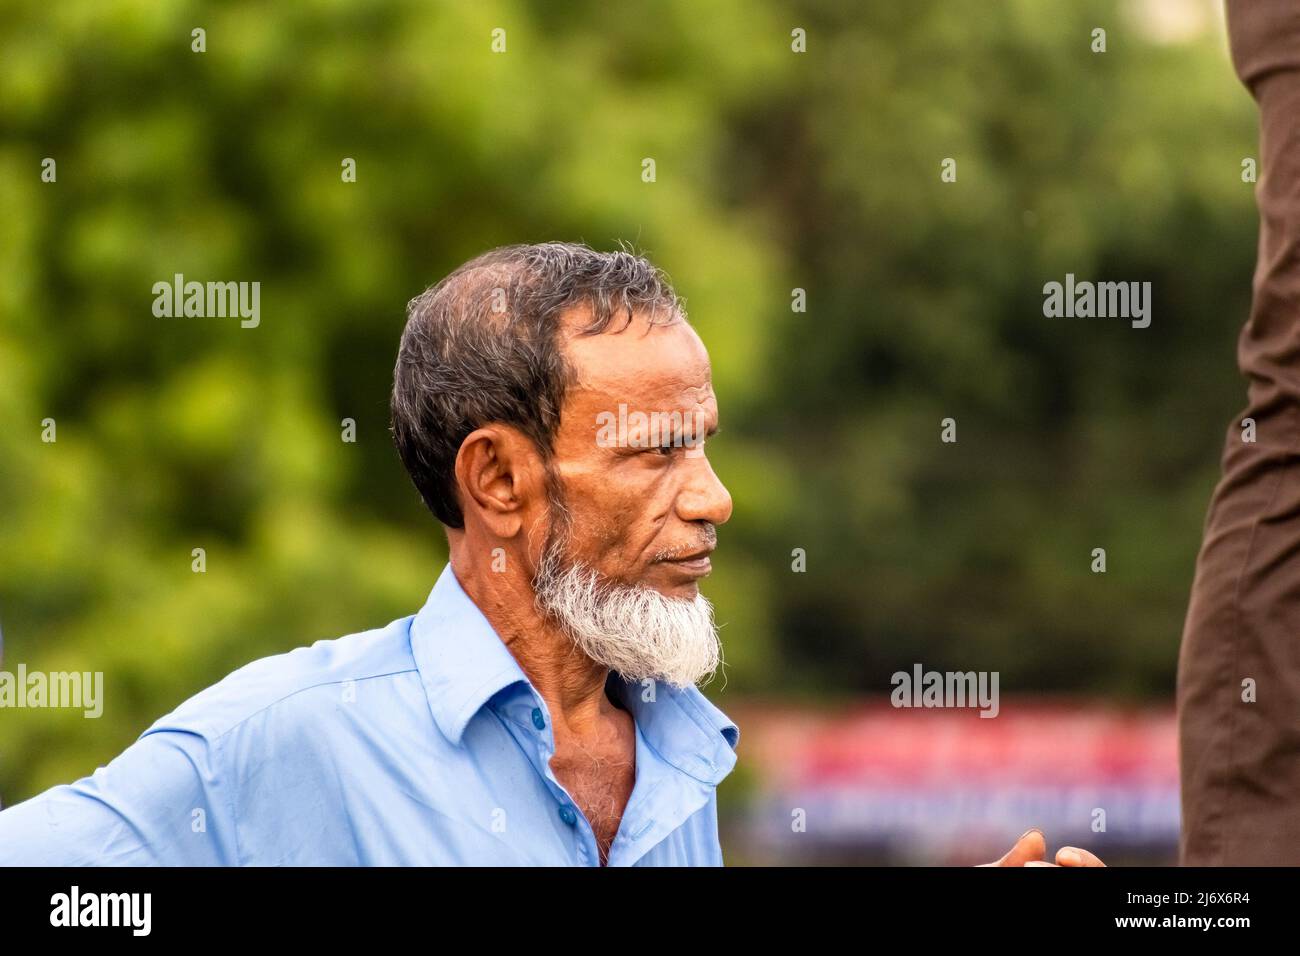 Vellore, Tamil Nadu, India - September 2018: A candid portrait of an elderly Indian Muslim man with a grey beard. Stock Photo